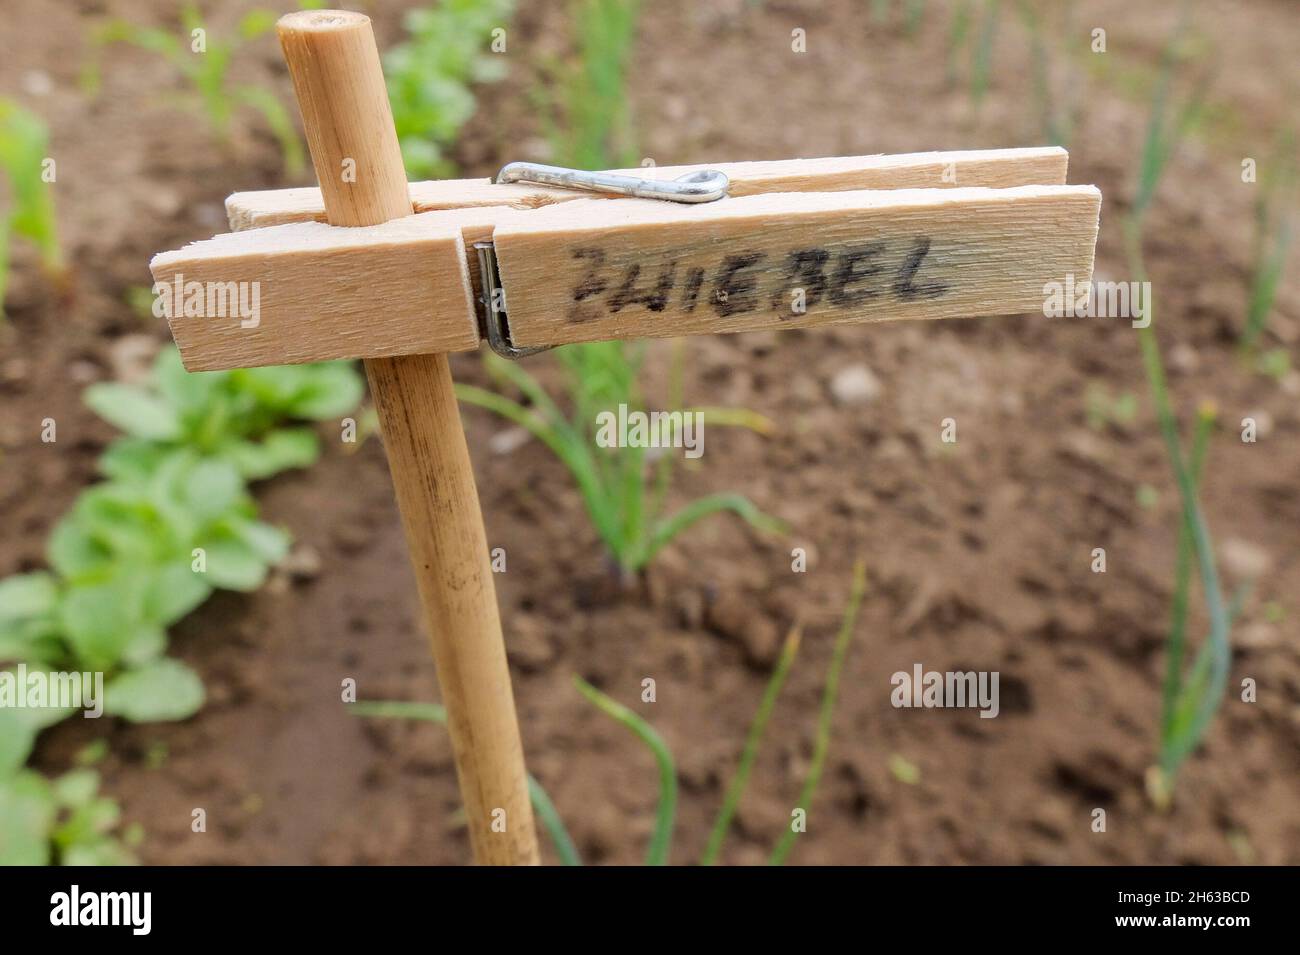 plant sign from clothespins Stock Photo